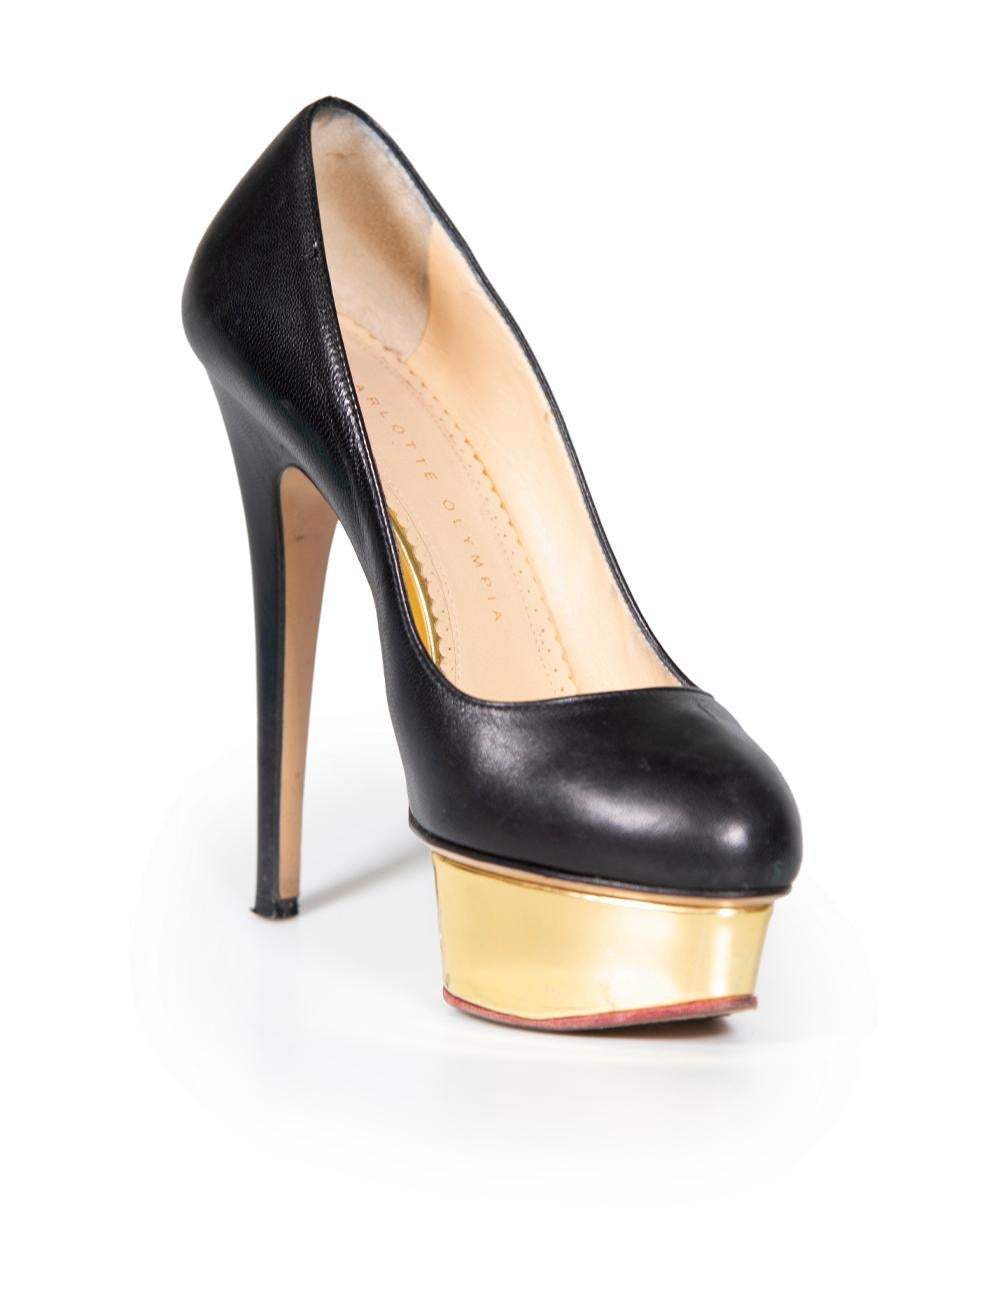 CONDITION is Very good. Minimal wear to heels is evident. light abrasion to the platforms and outer toe area, with some discolouration/dye transfer at the inside heel on this used Charlotte Olympia designer resale item.
 
 
 
 Details
 
 
 Model: